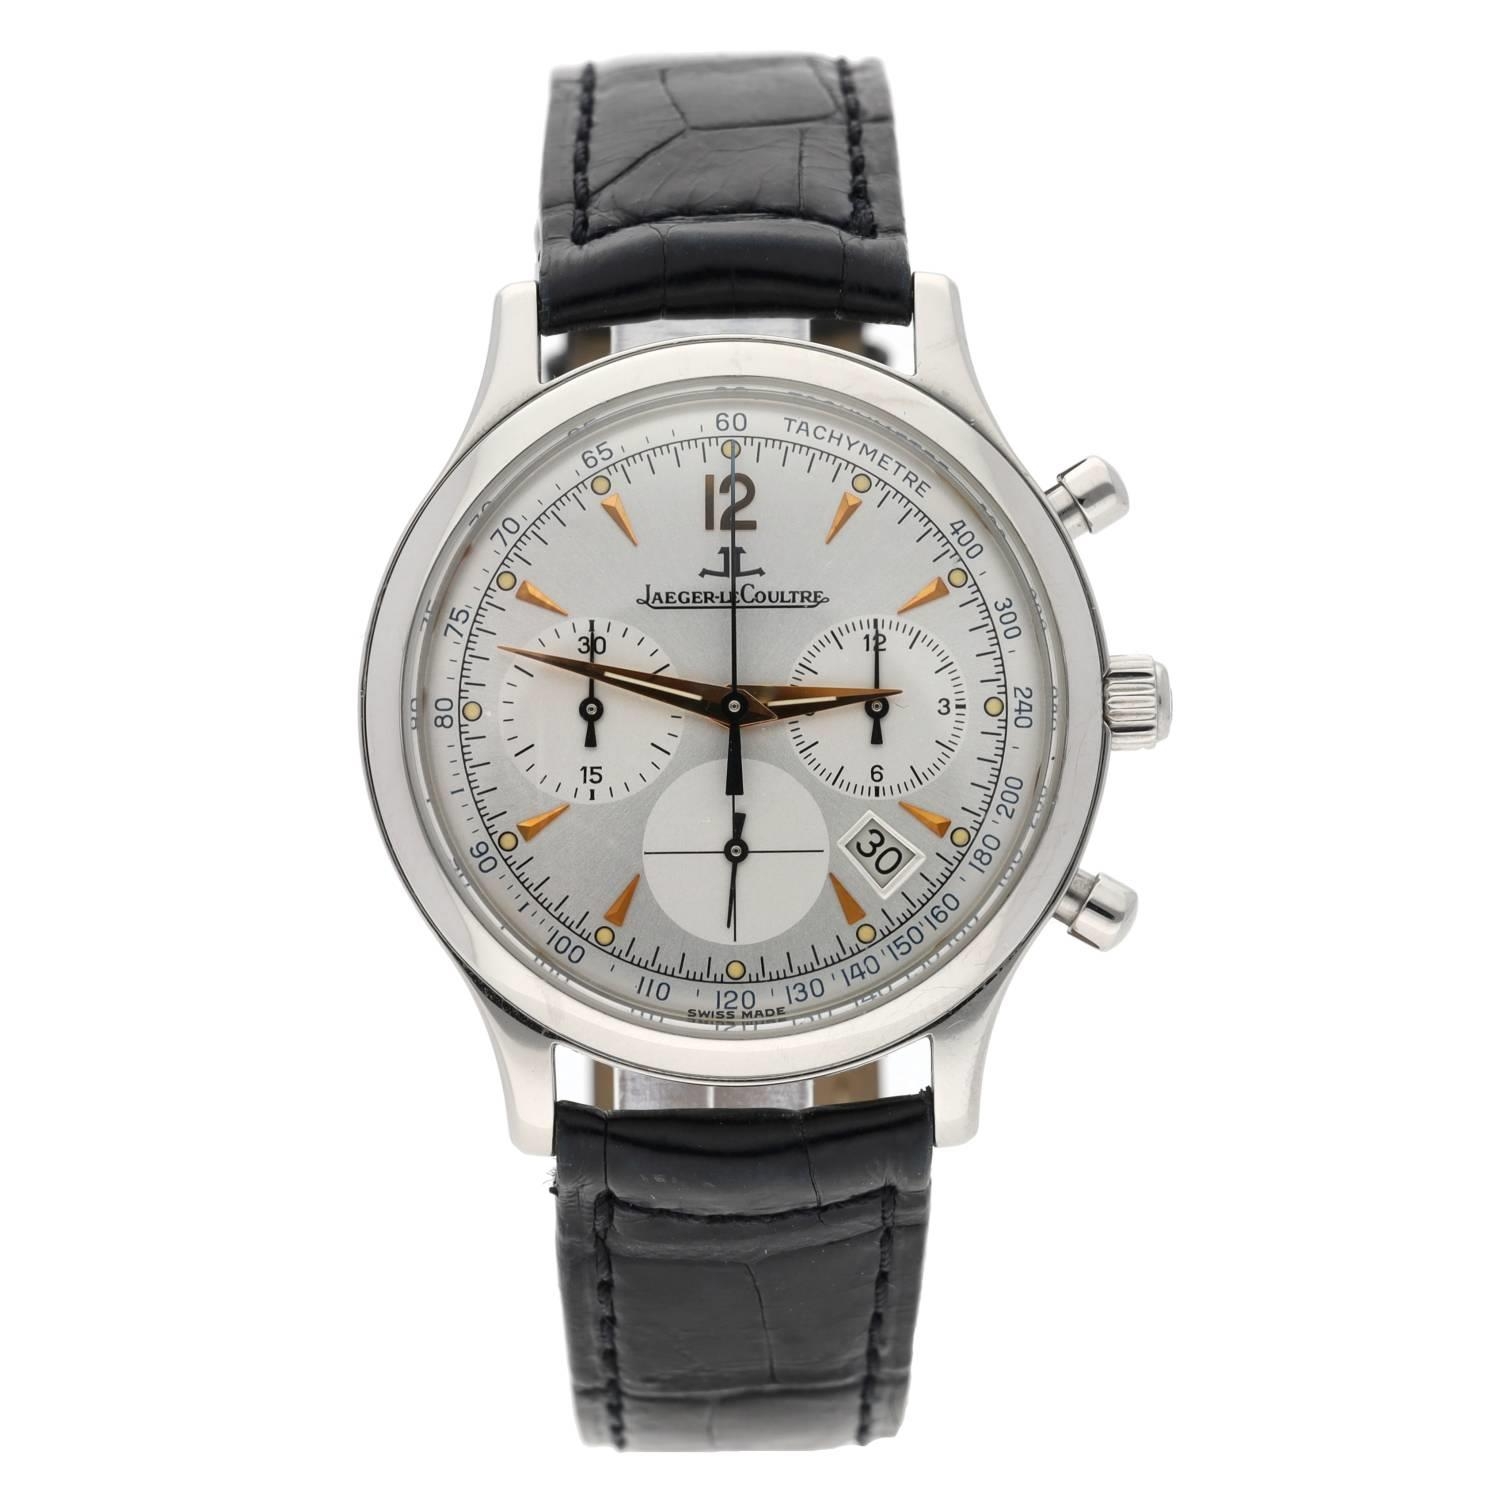 Jaeger-LeCoultre Master Control 1000 Hours Chronograph stainless steel gentleman's wristwatch,